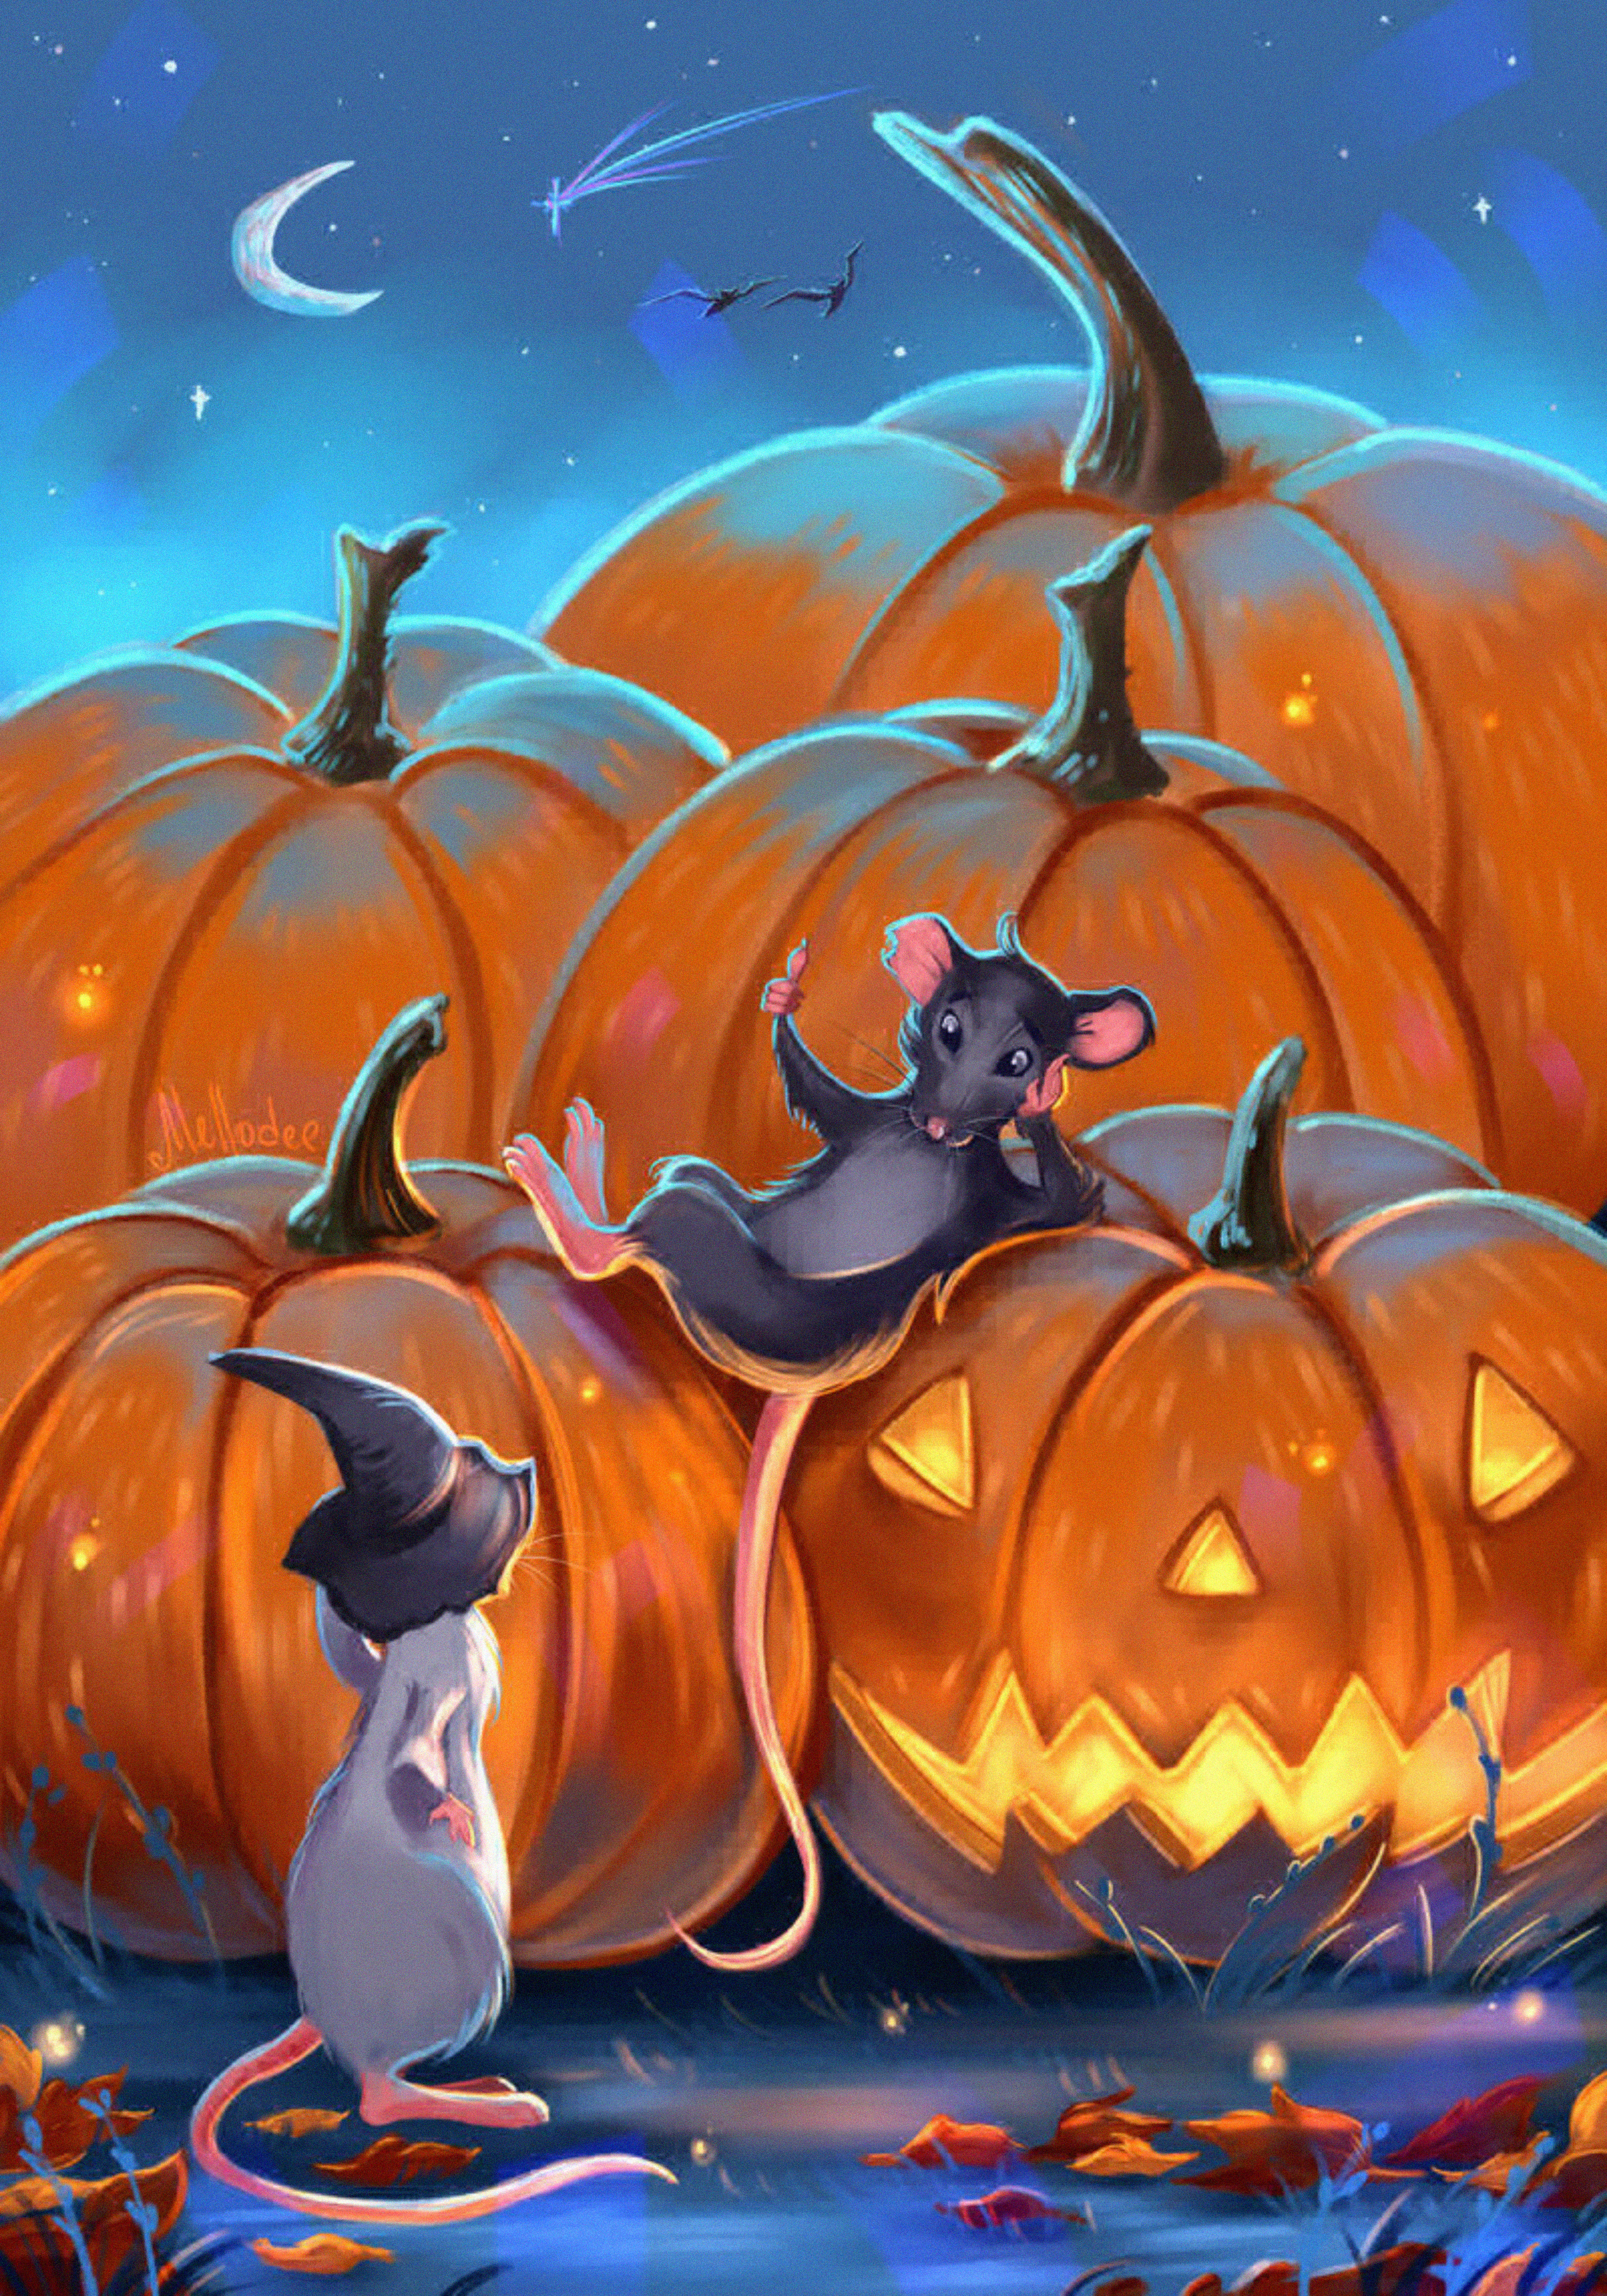 116292 download wallpaper art, halloween, mice, night, pumpkin screensavers and pictures for free